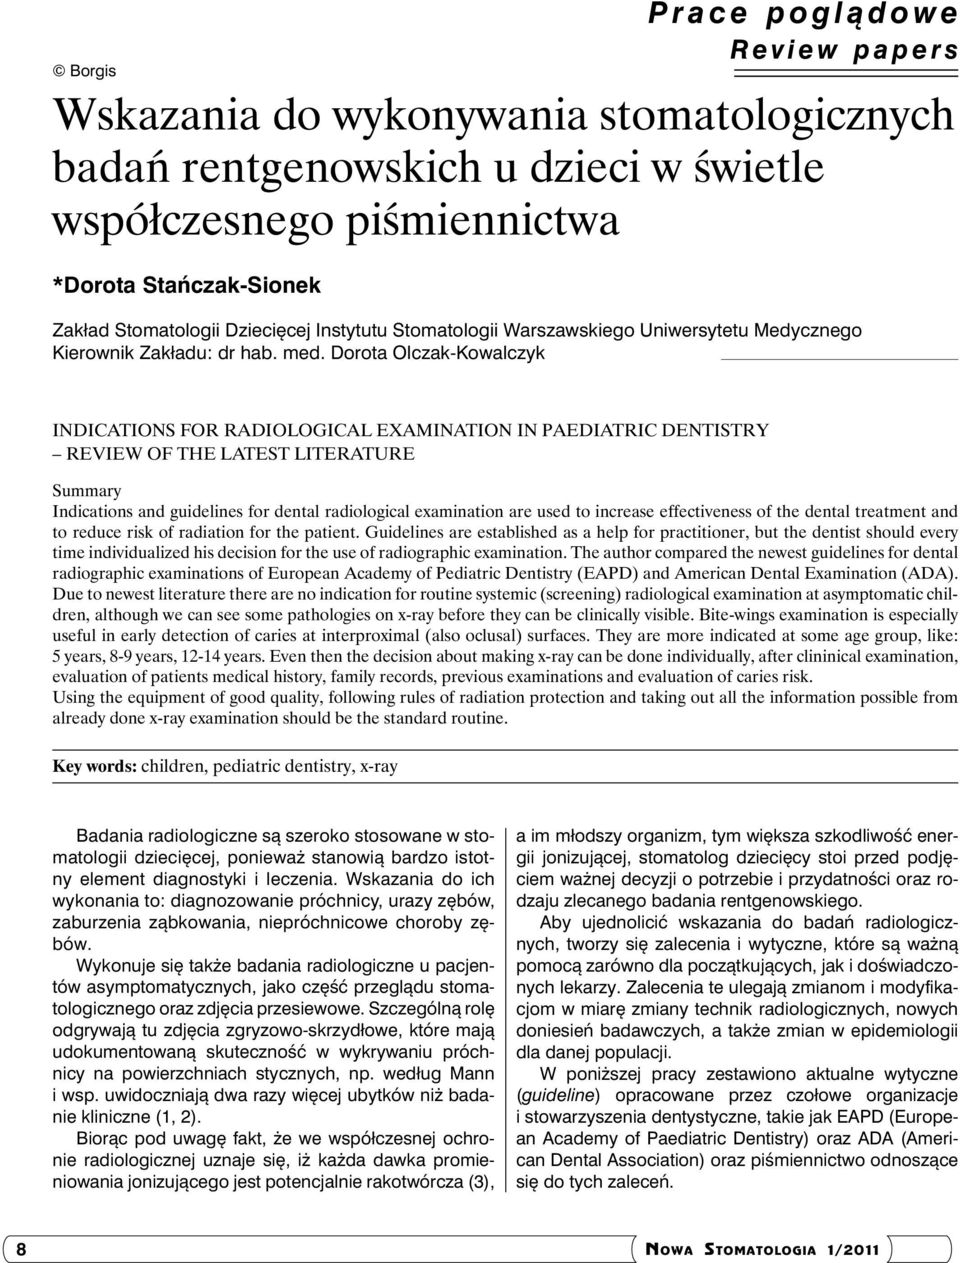 Dorota Olczak-Kowalczyk Indications for radiological examination in paediatric dentistry review of the latest literature Summary Indications and guidelines for dental radiological examination are